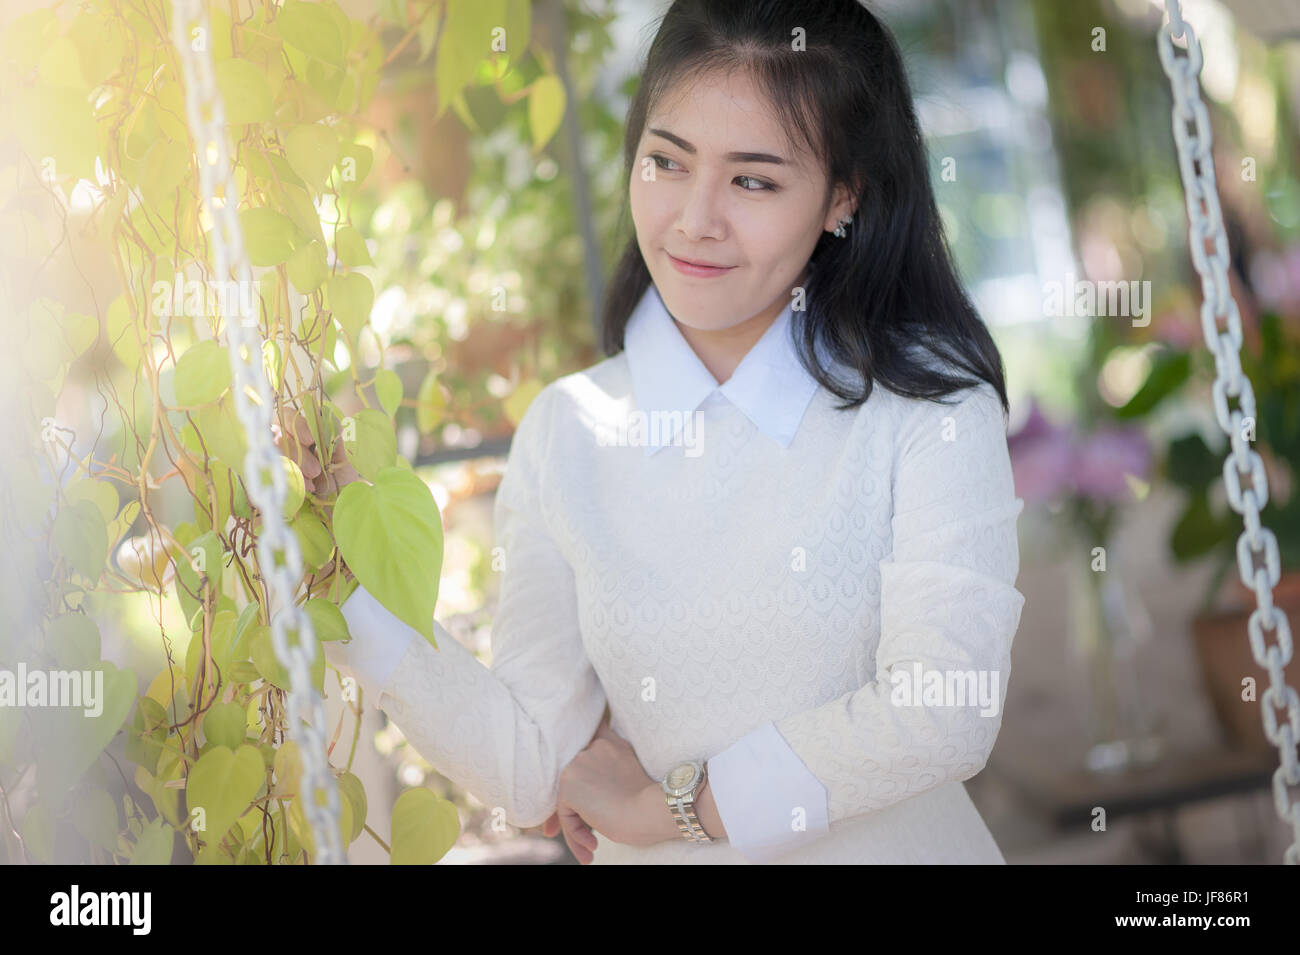 Young attractive Asian woman smiling in green garden. Stock Photo